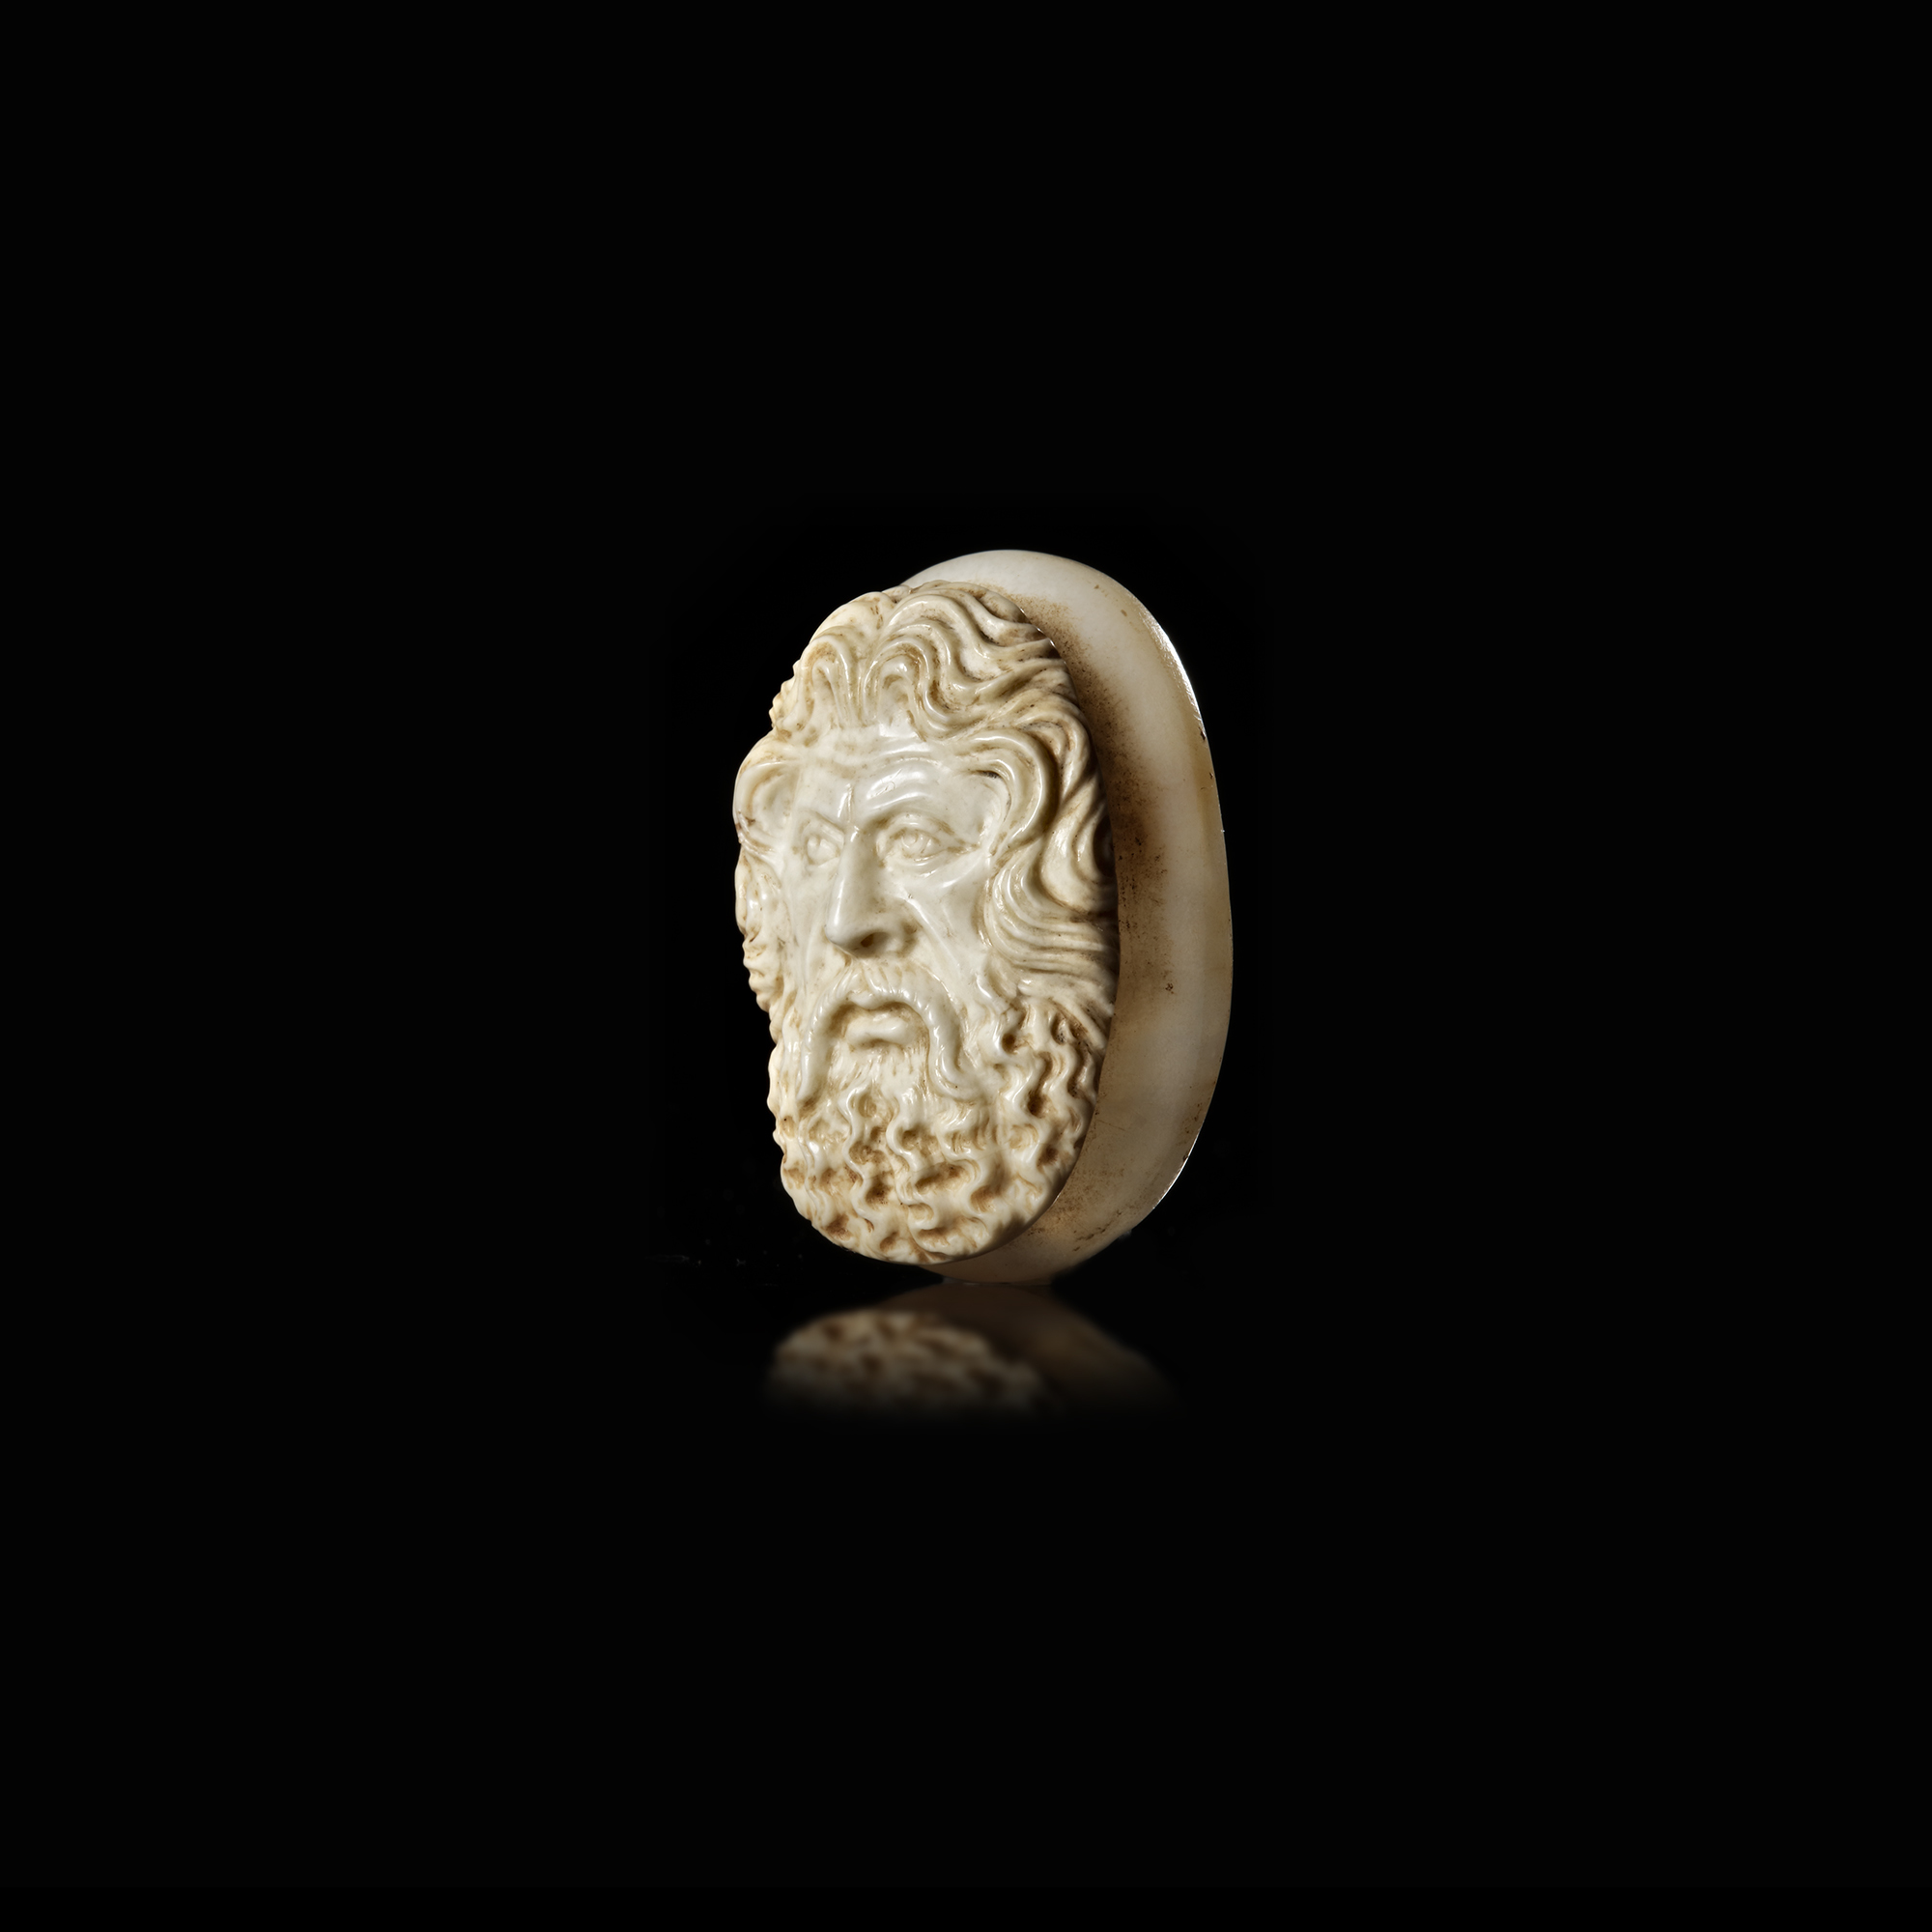 A CAMEO OF A FACING BEARDED MAN, 17TH-18TH CENTURY AD - Image 3 of 4